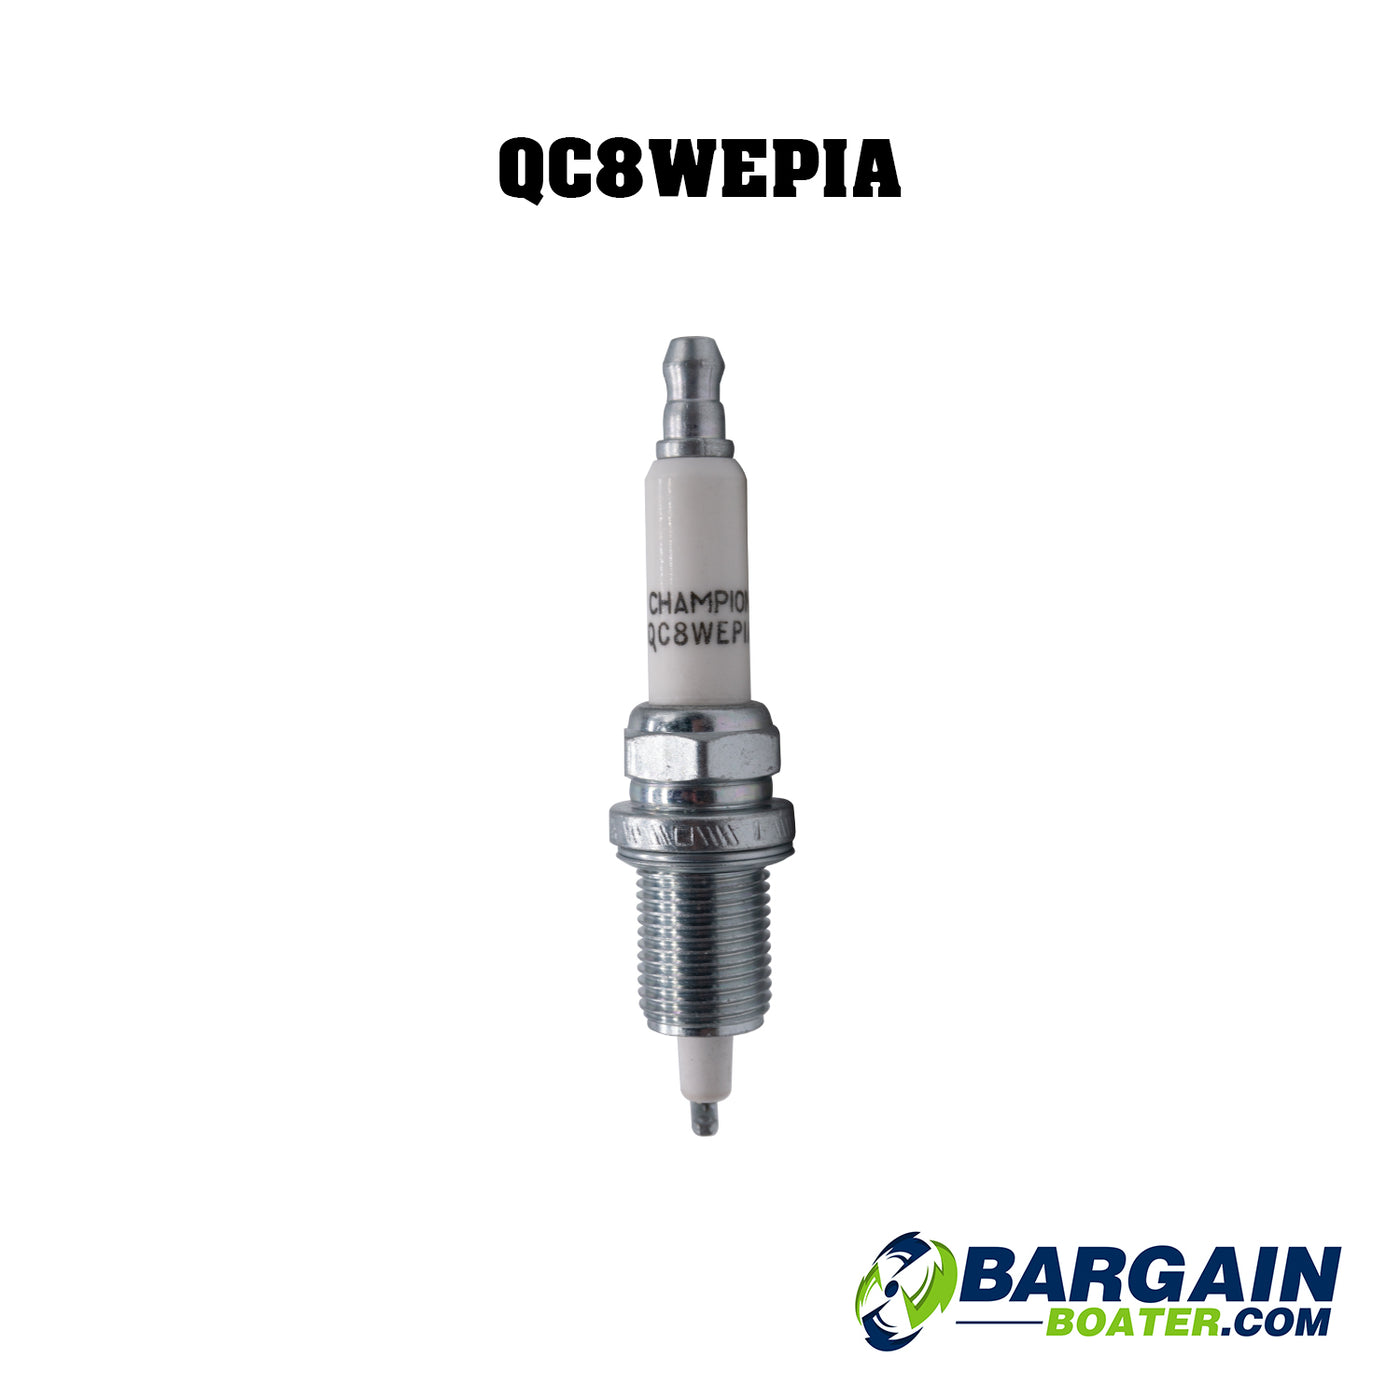 This is an OEM Evinrude Etec G2 spark plug, part number 5010806 (QC8WEPIA). It supersedes from part number 5009521 (QC8WEPI), and is an improved version of the plug.